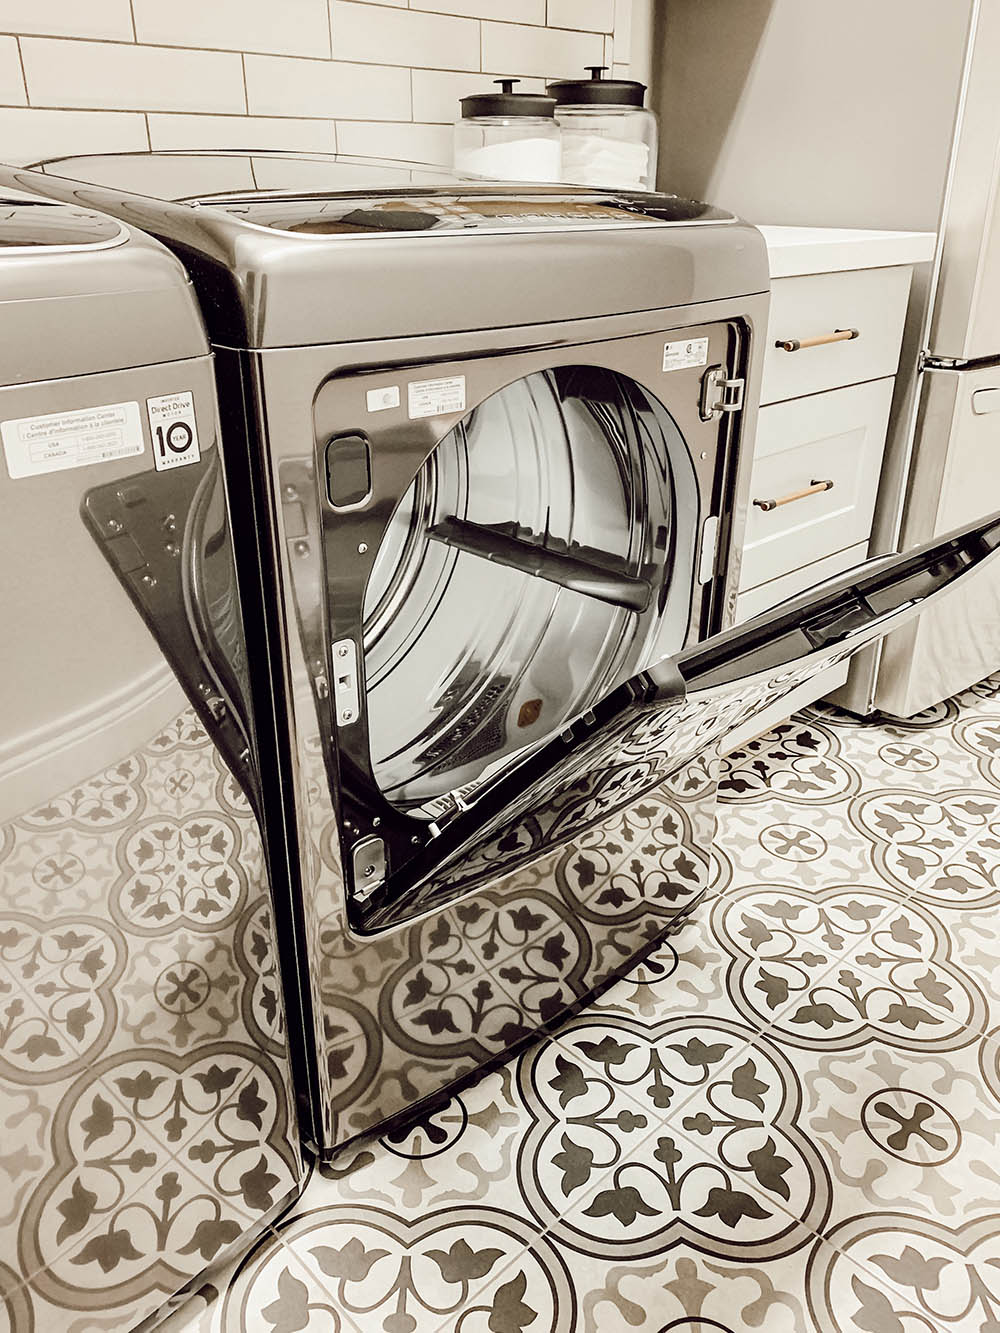 Exterior of the LG Smart Electric Dryer and mosaic titled flooring.